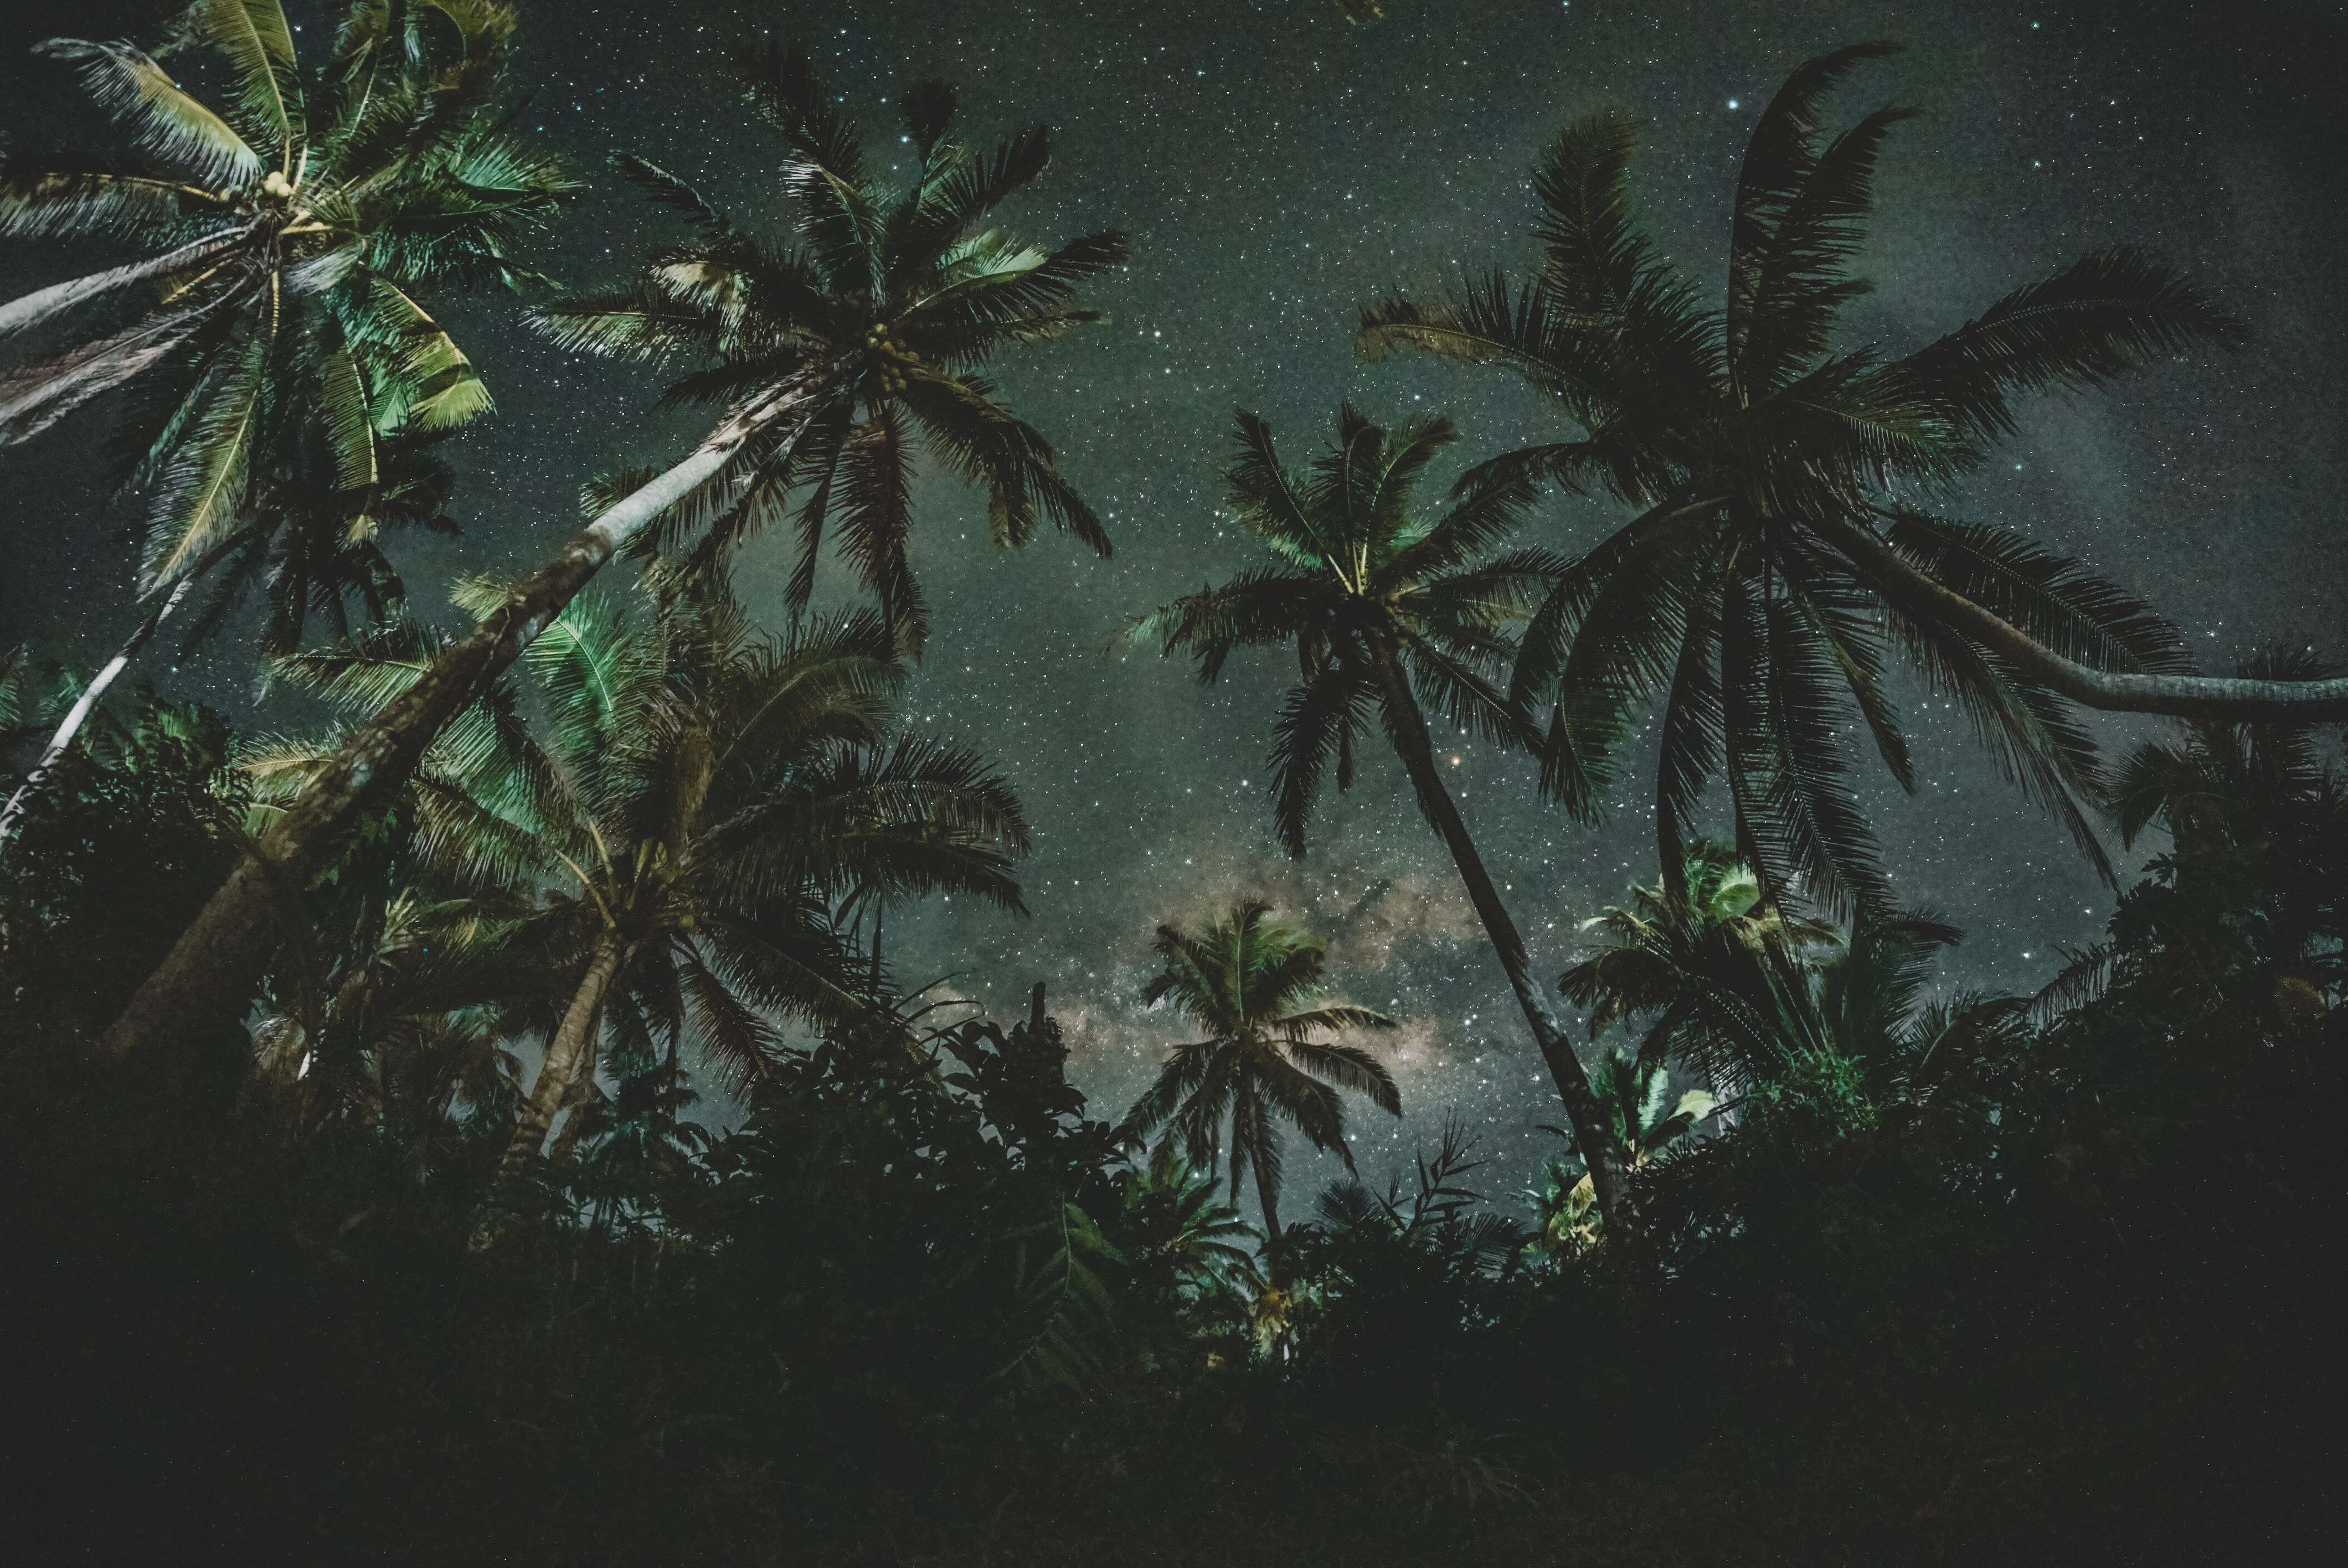 51477 download wallpaper palms, nature, trees, starry sky screensavers and pictures for free